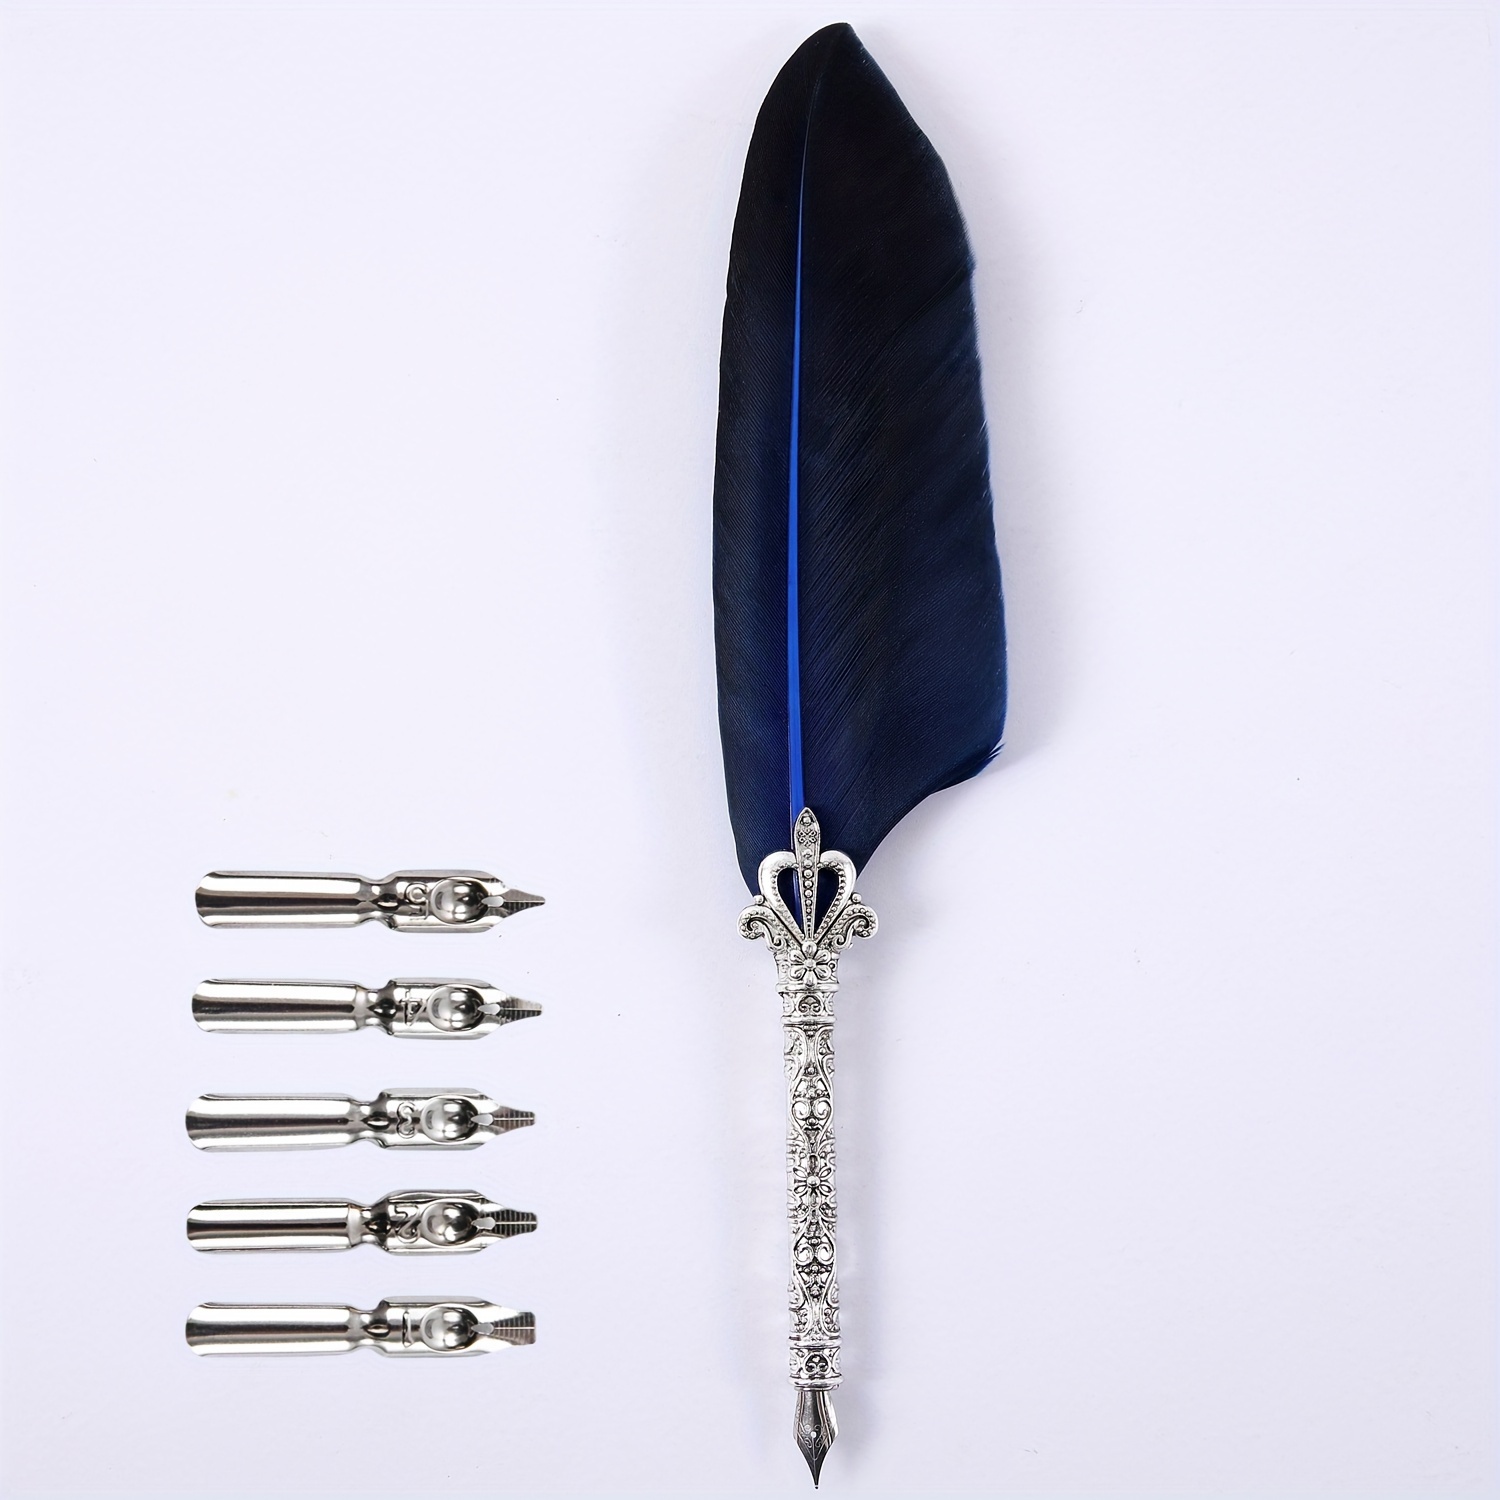 Feather Pen Set: Feather quill, wood pen, metal nibs, and ink